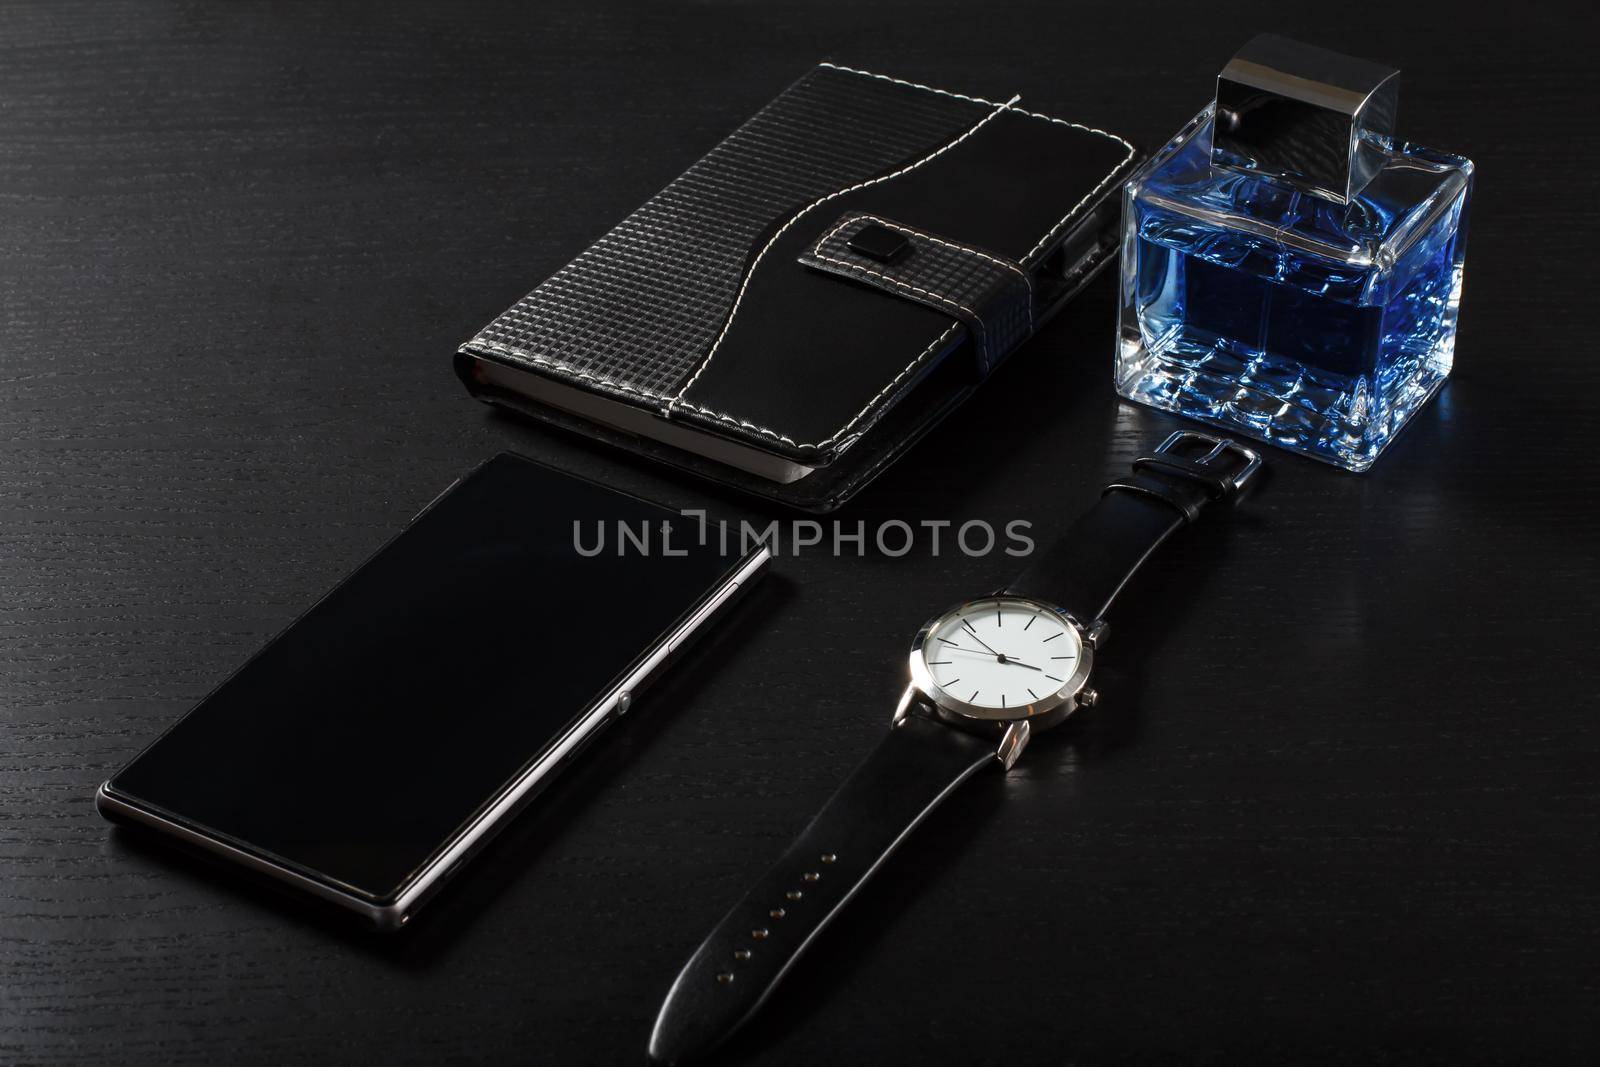 Watch with a leather strap, notebook in leather cover, sell phone, man perfume on a black background